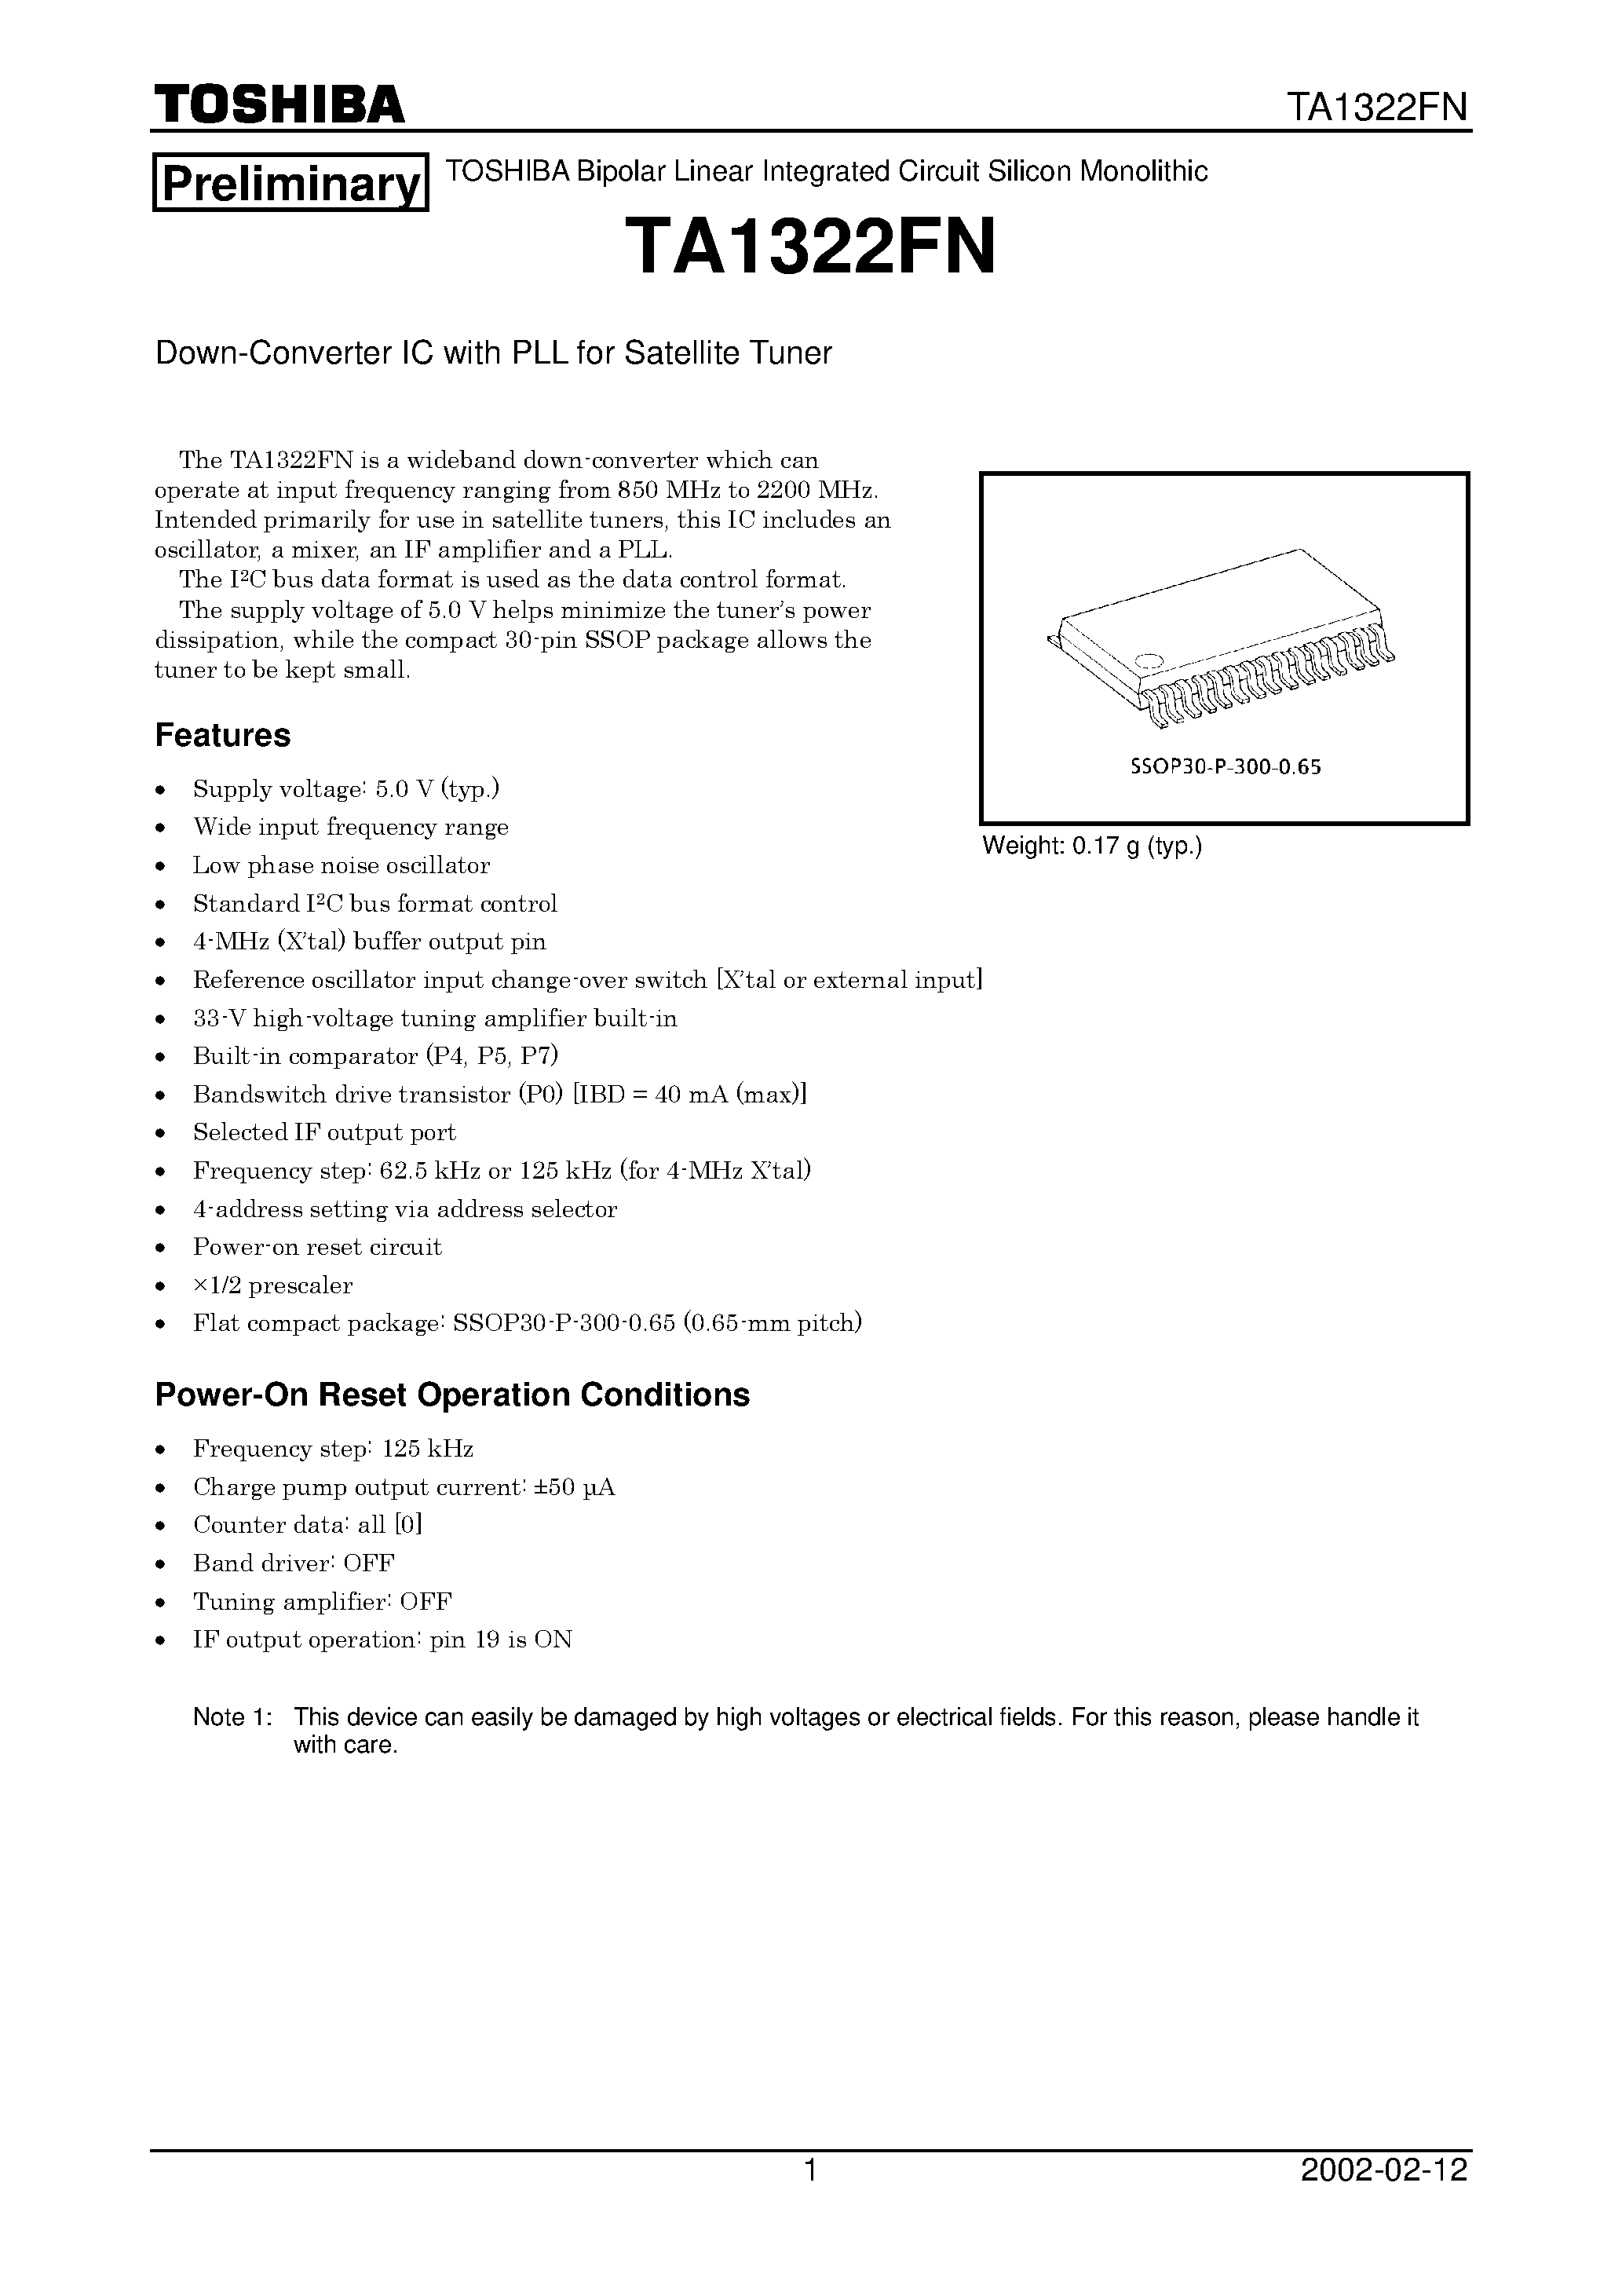 Datasheet TA1322FN - DOWB-CONVERTER IC WITH PLL FOR SATELLITE TUNER page 1